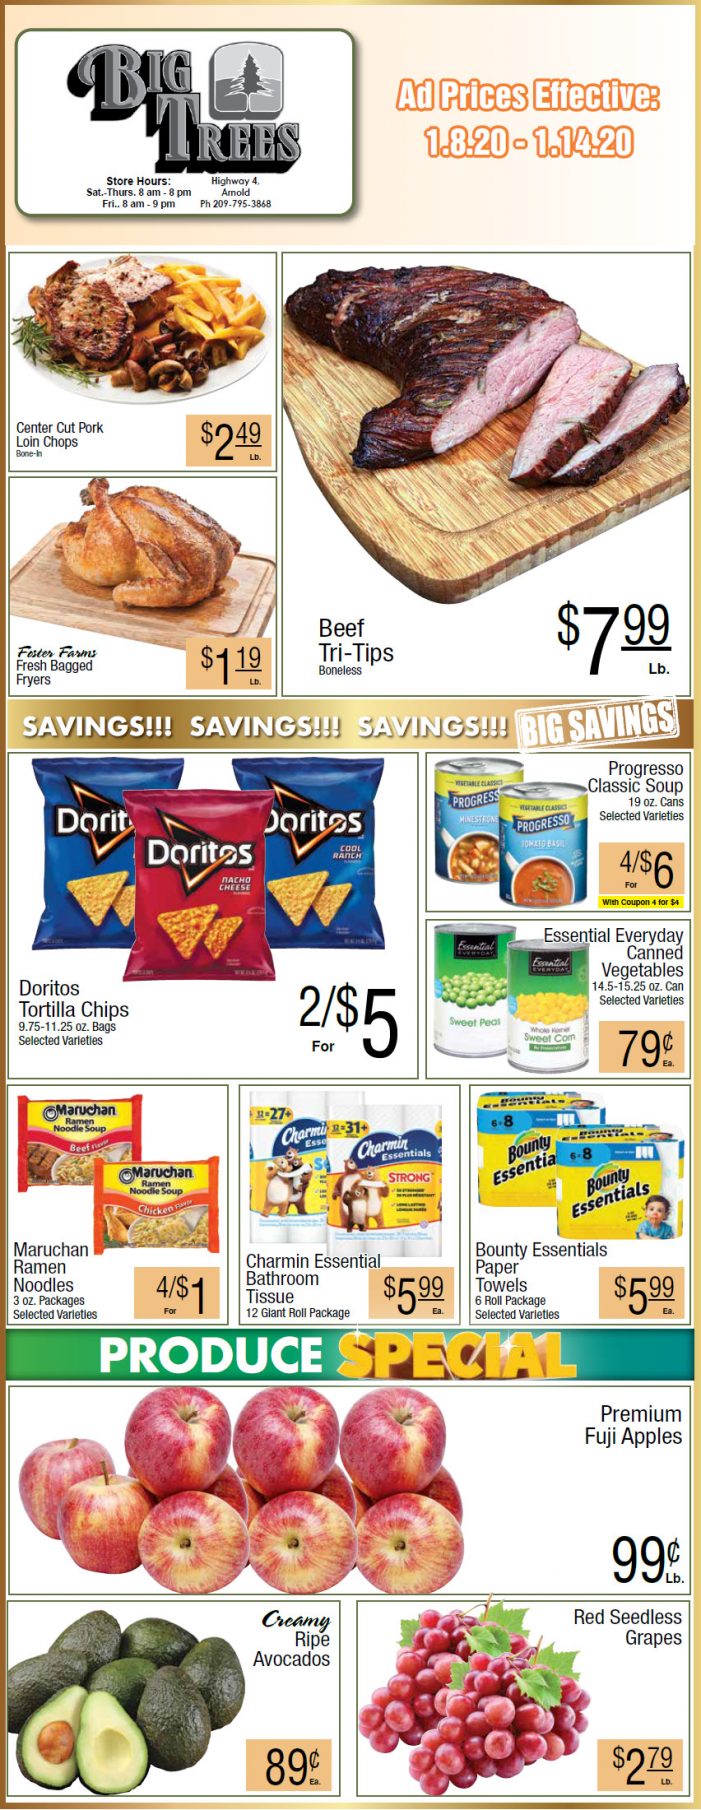 Big Trees Market Weekly Ad & Grocery Specials Through January 14th